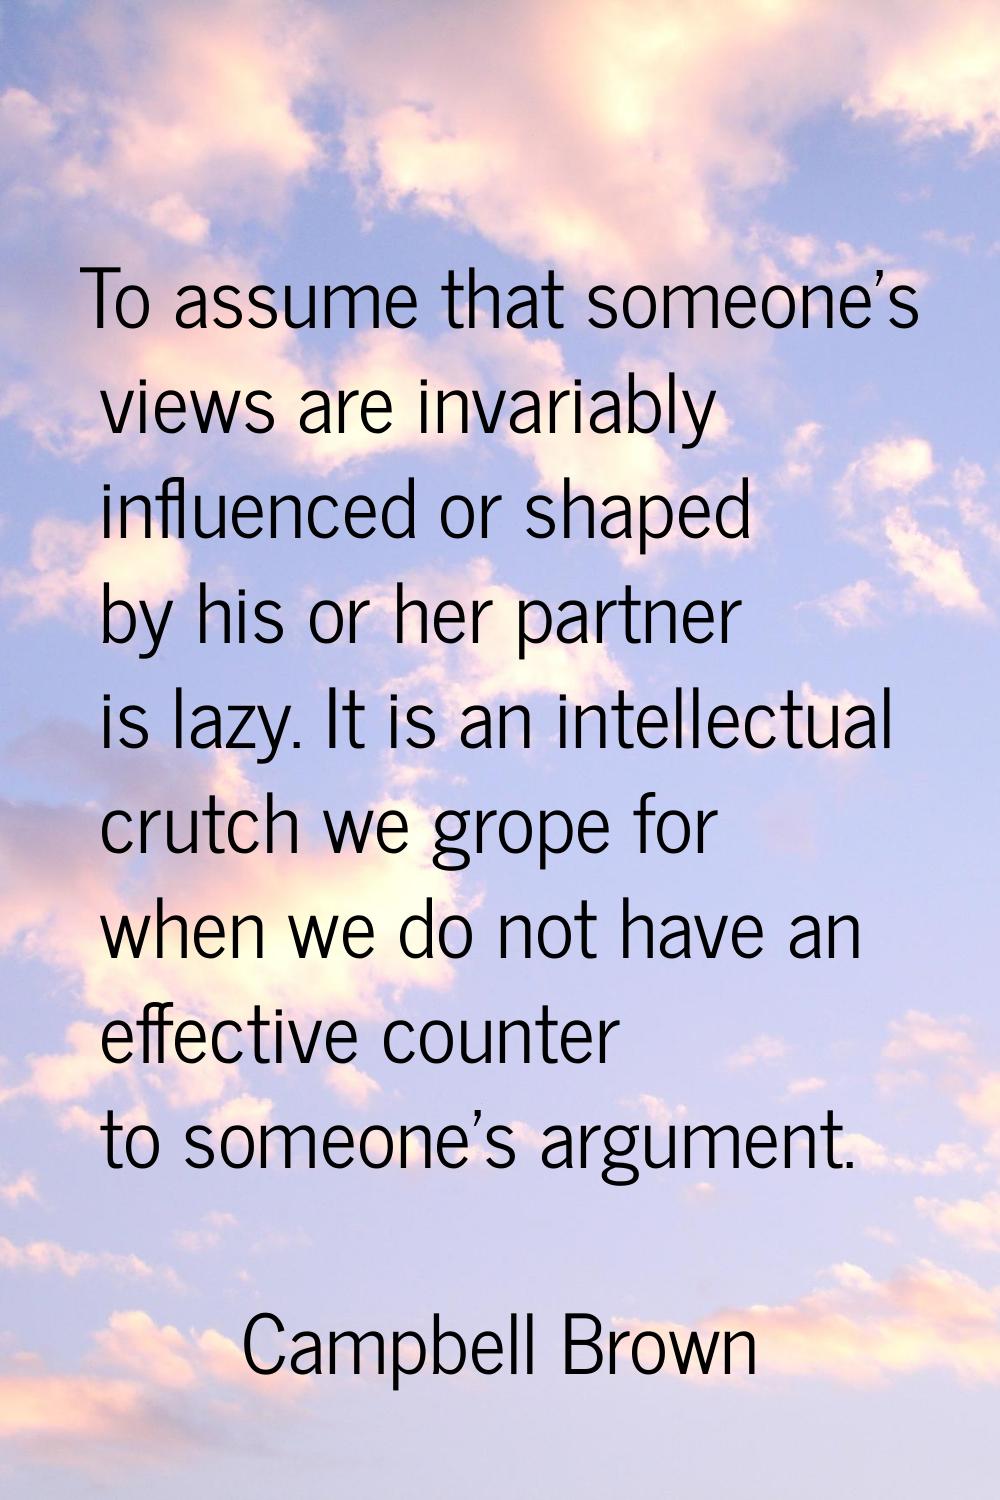 To assume that someone's views are invariably influenced or shaped by his or her partner is lazy. I